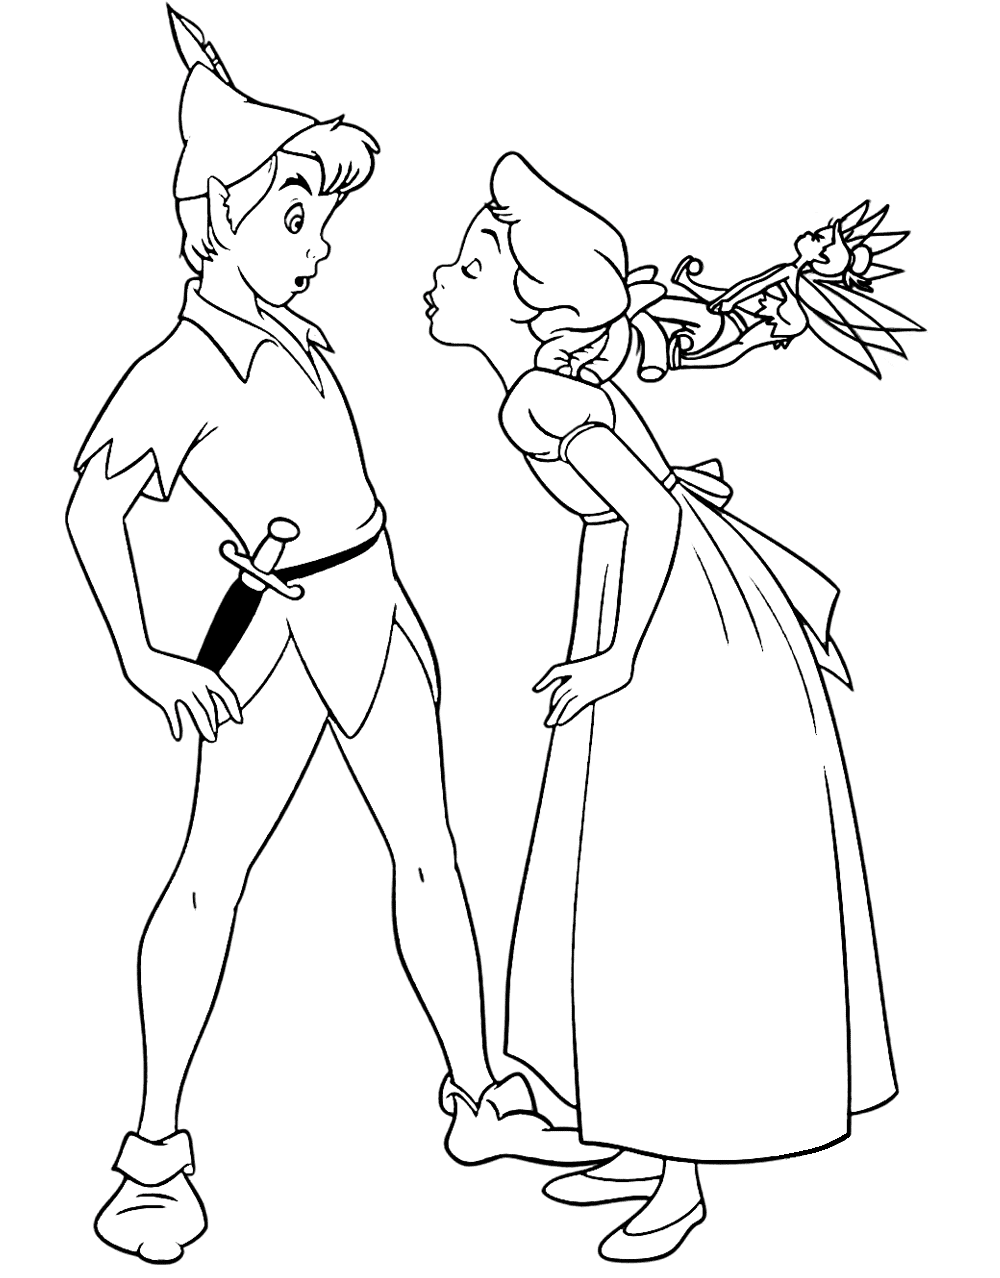 Peter Pan, Wendy and Tinker Bell Coloring Page